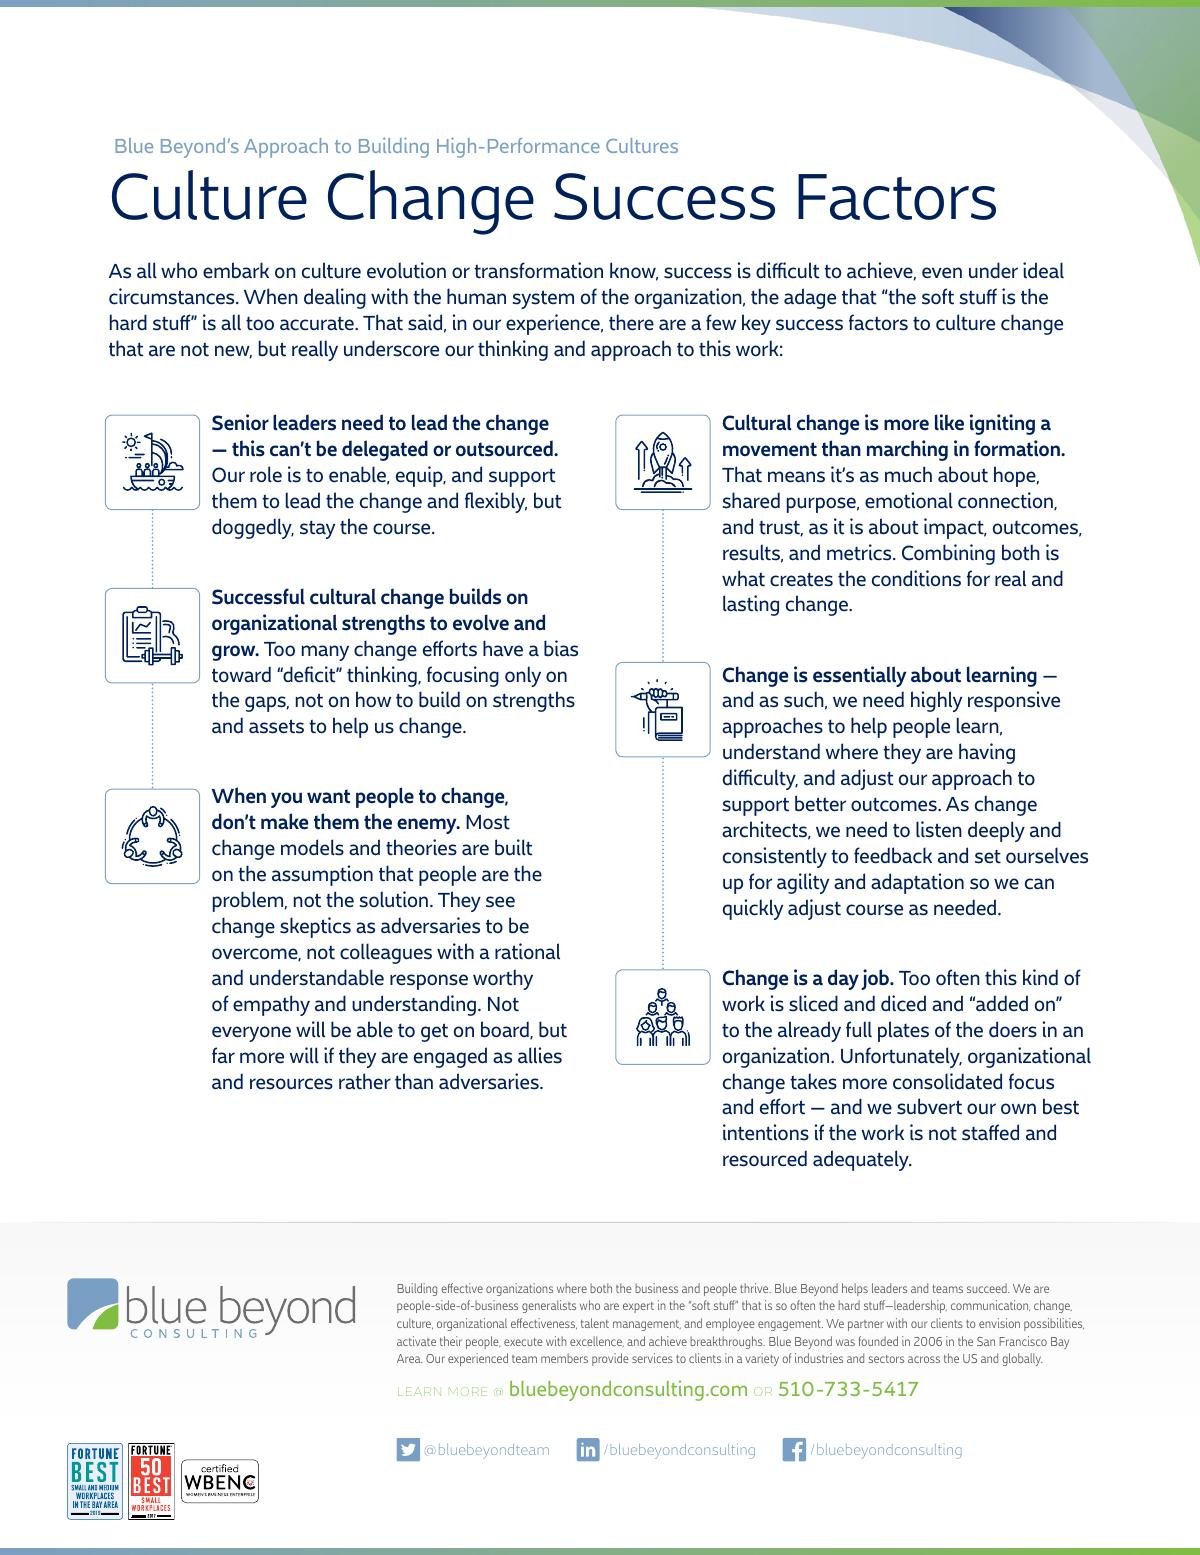 Building a High-Performance Culture